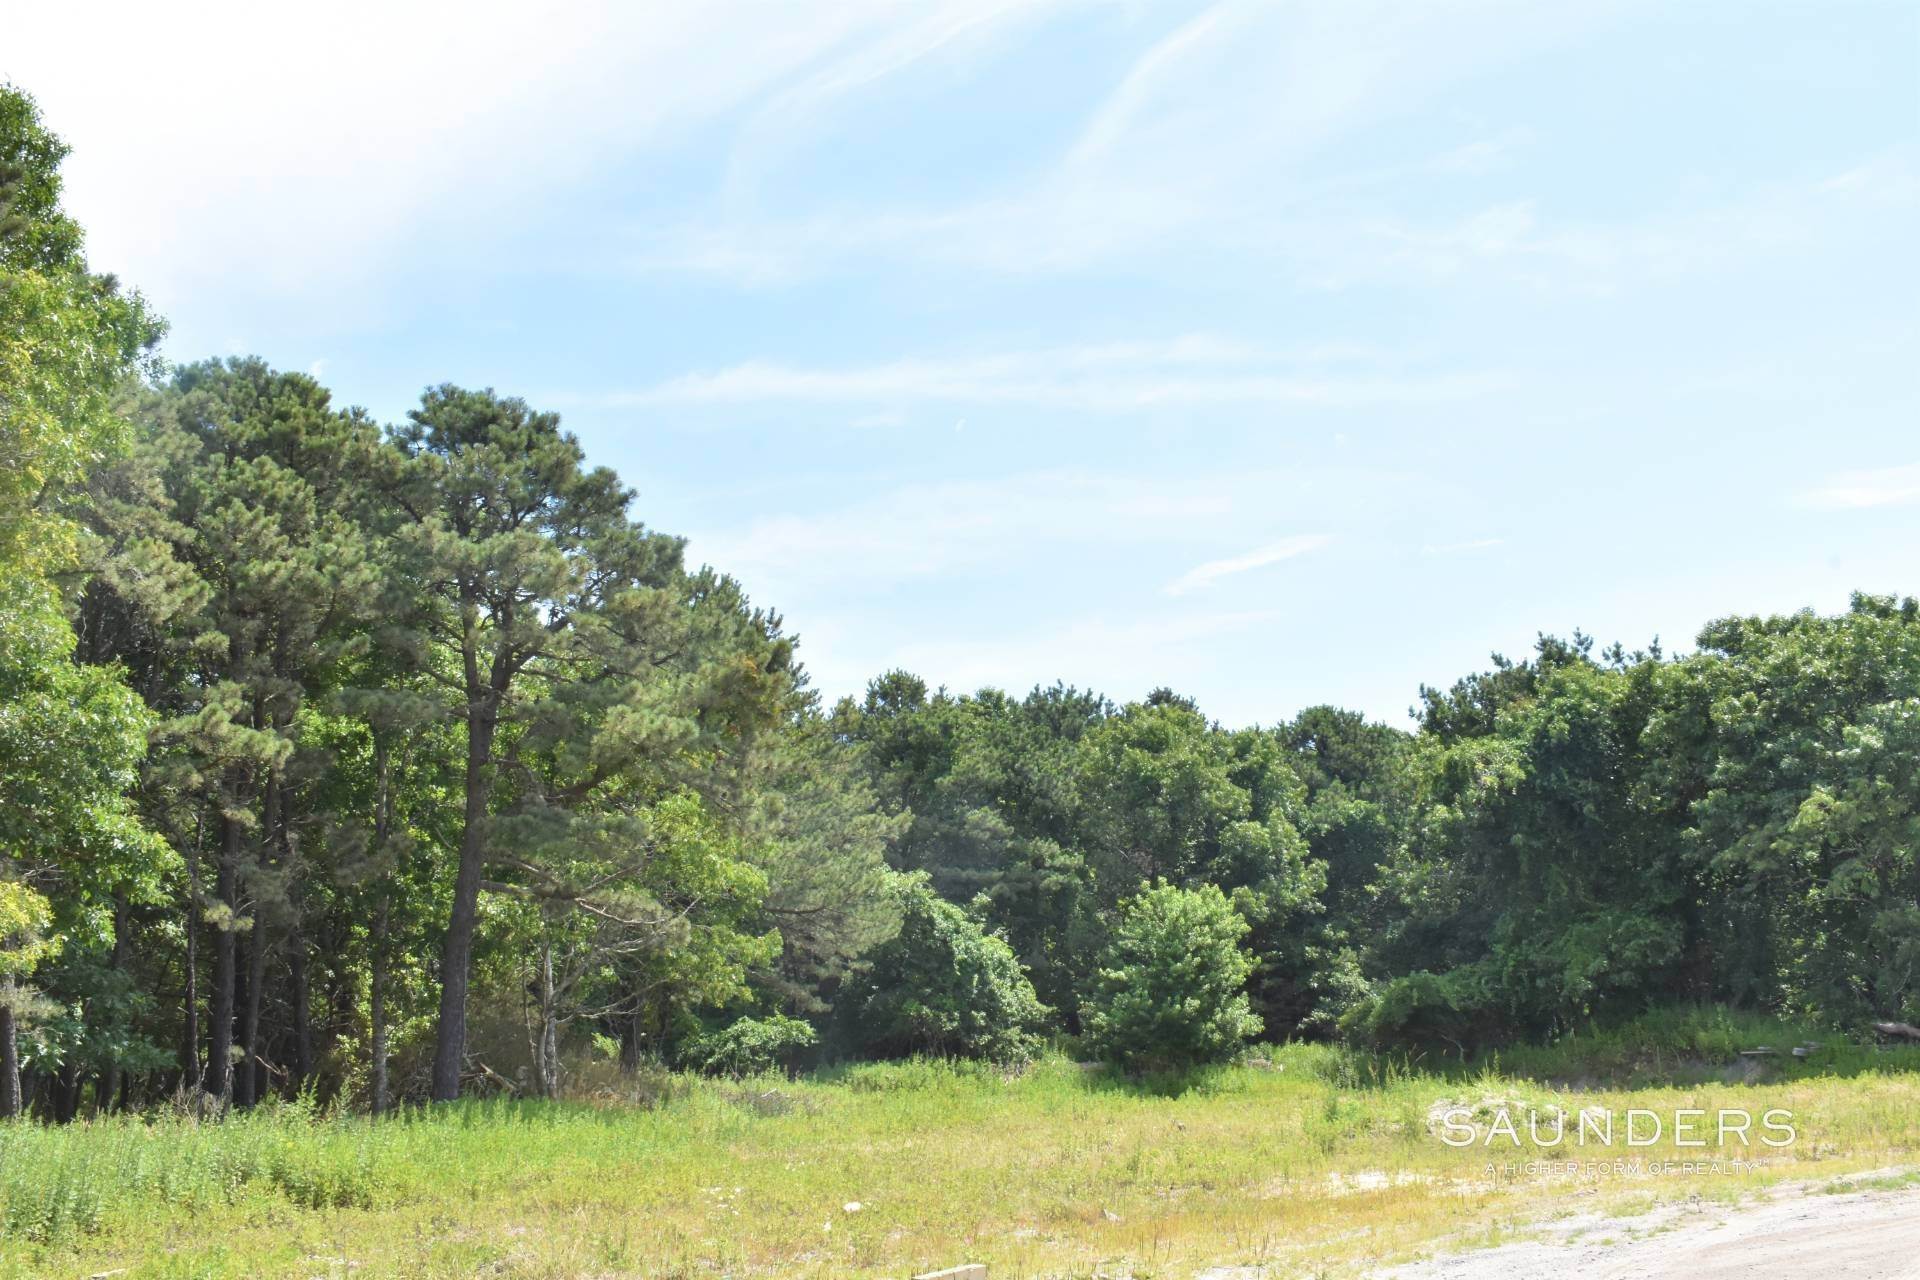 12. Land for Sale at Development Opportunity Quiogue Westhampton Beach 72 & 82 & 86 South Country Road, Quiogue, NY 11978